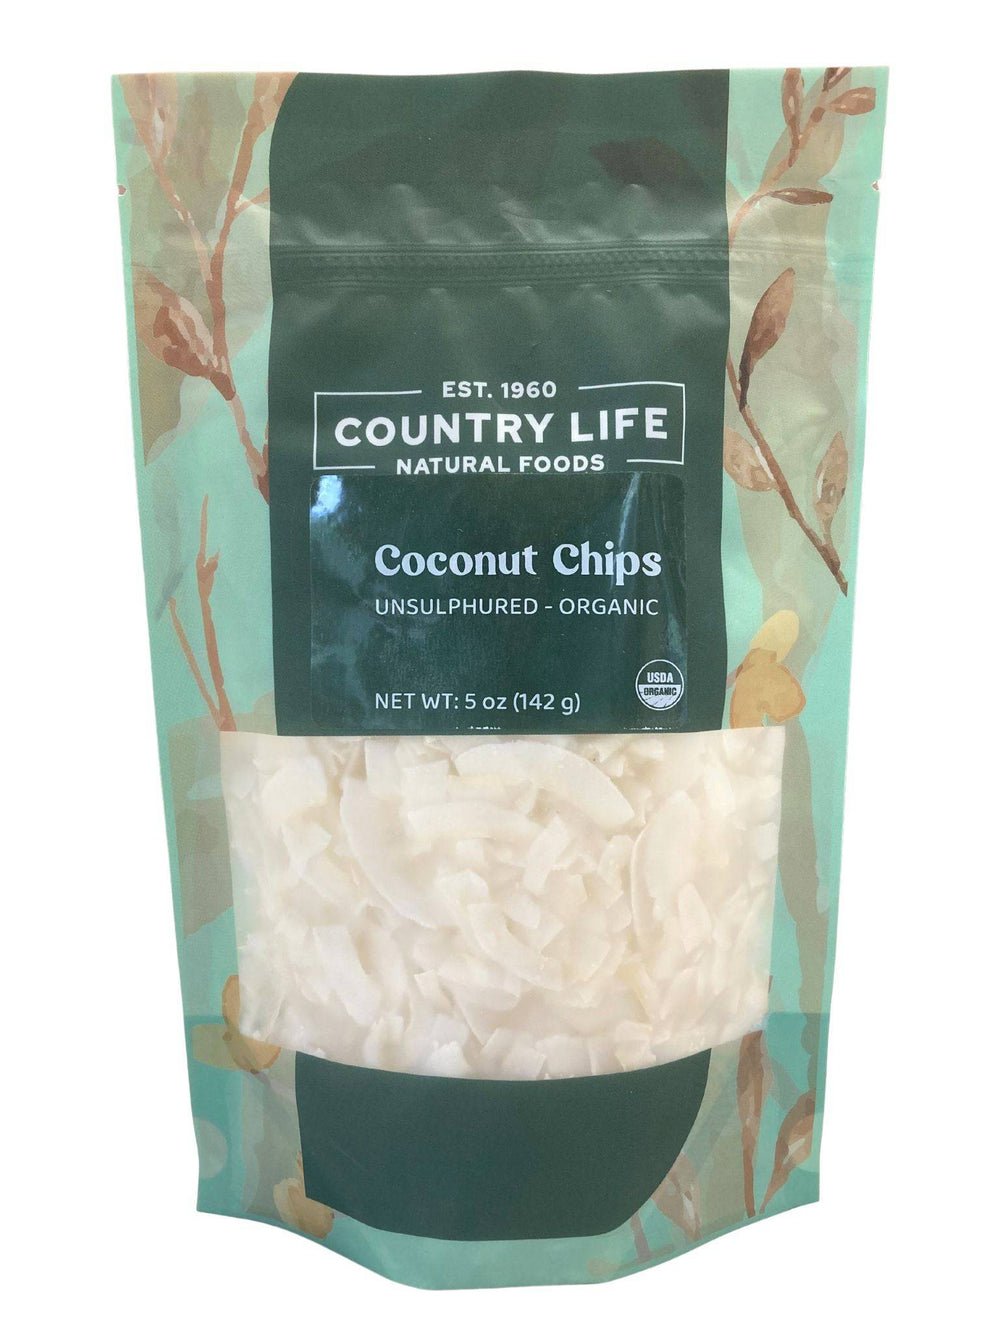 Organic Coconut Chips - Country Life Natural Foods